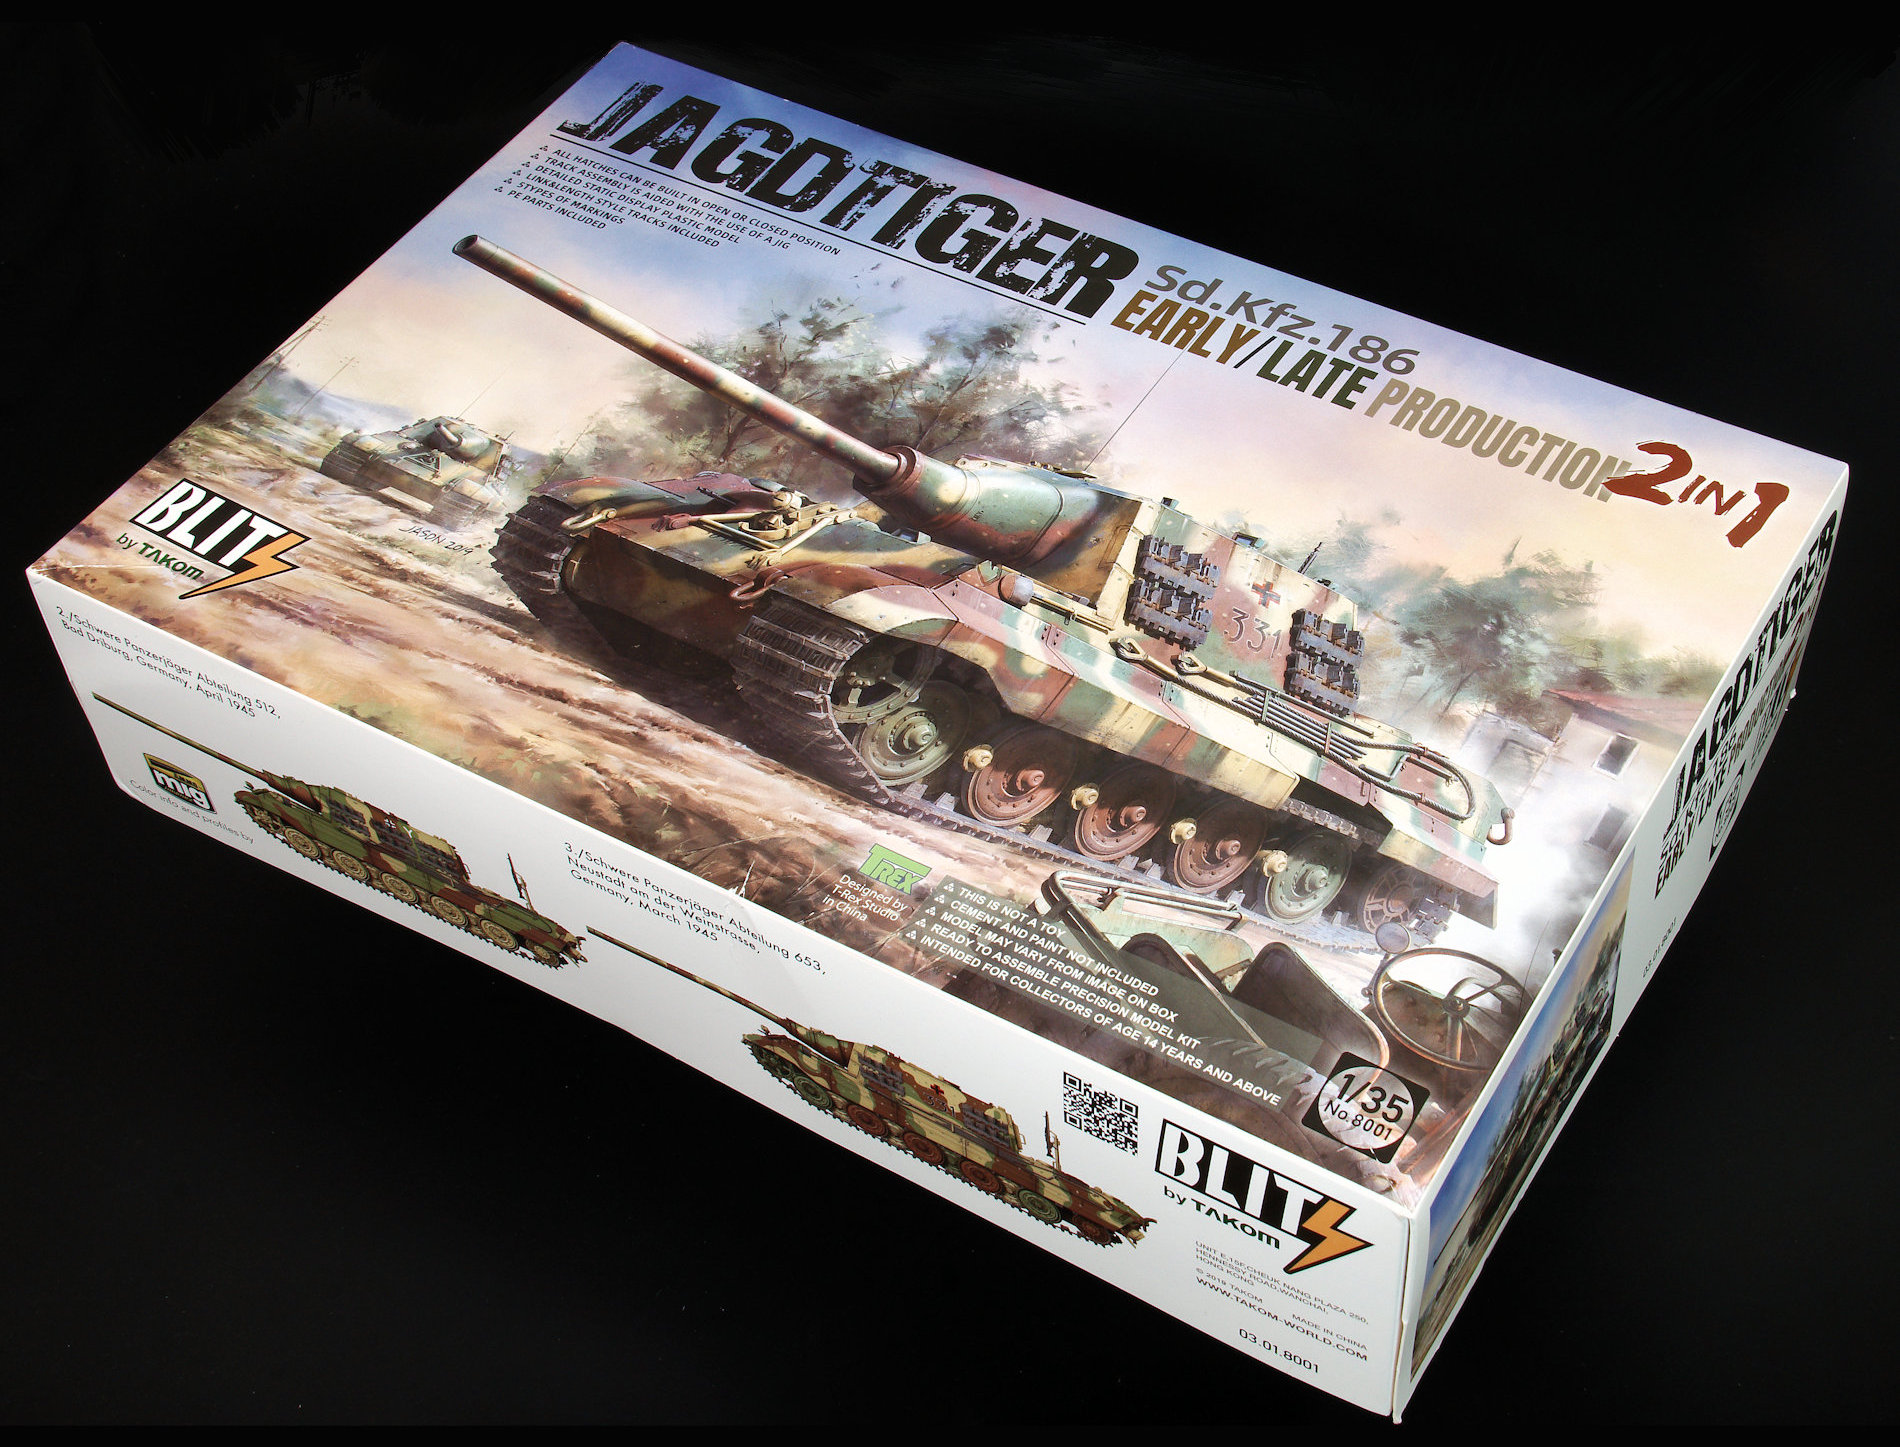 The Modelling News: 1/35th scale Jagdtiger Sd.Kfz.186 Early/Late Production  (2 in 1 kit) from Takom - Pt.I: Review & build